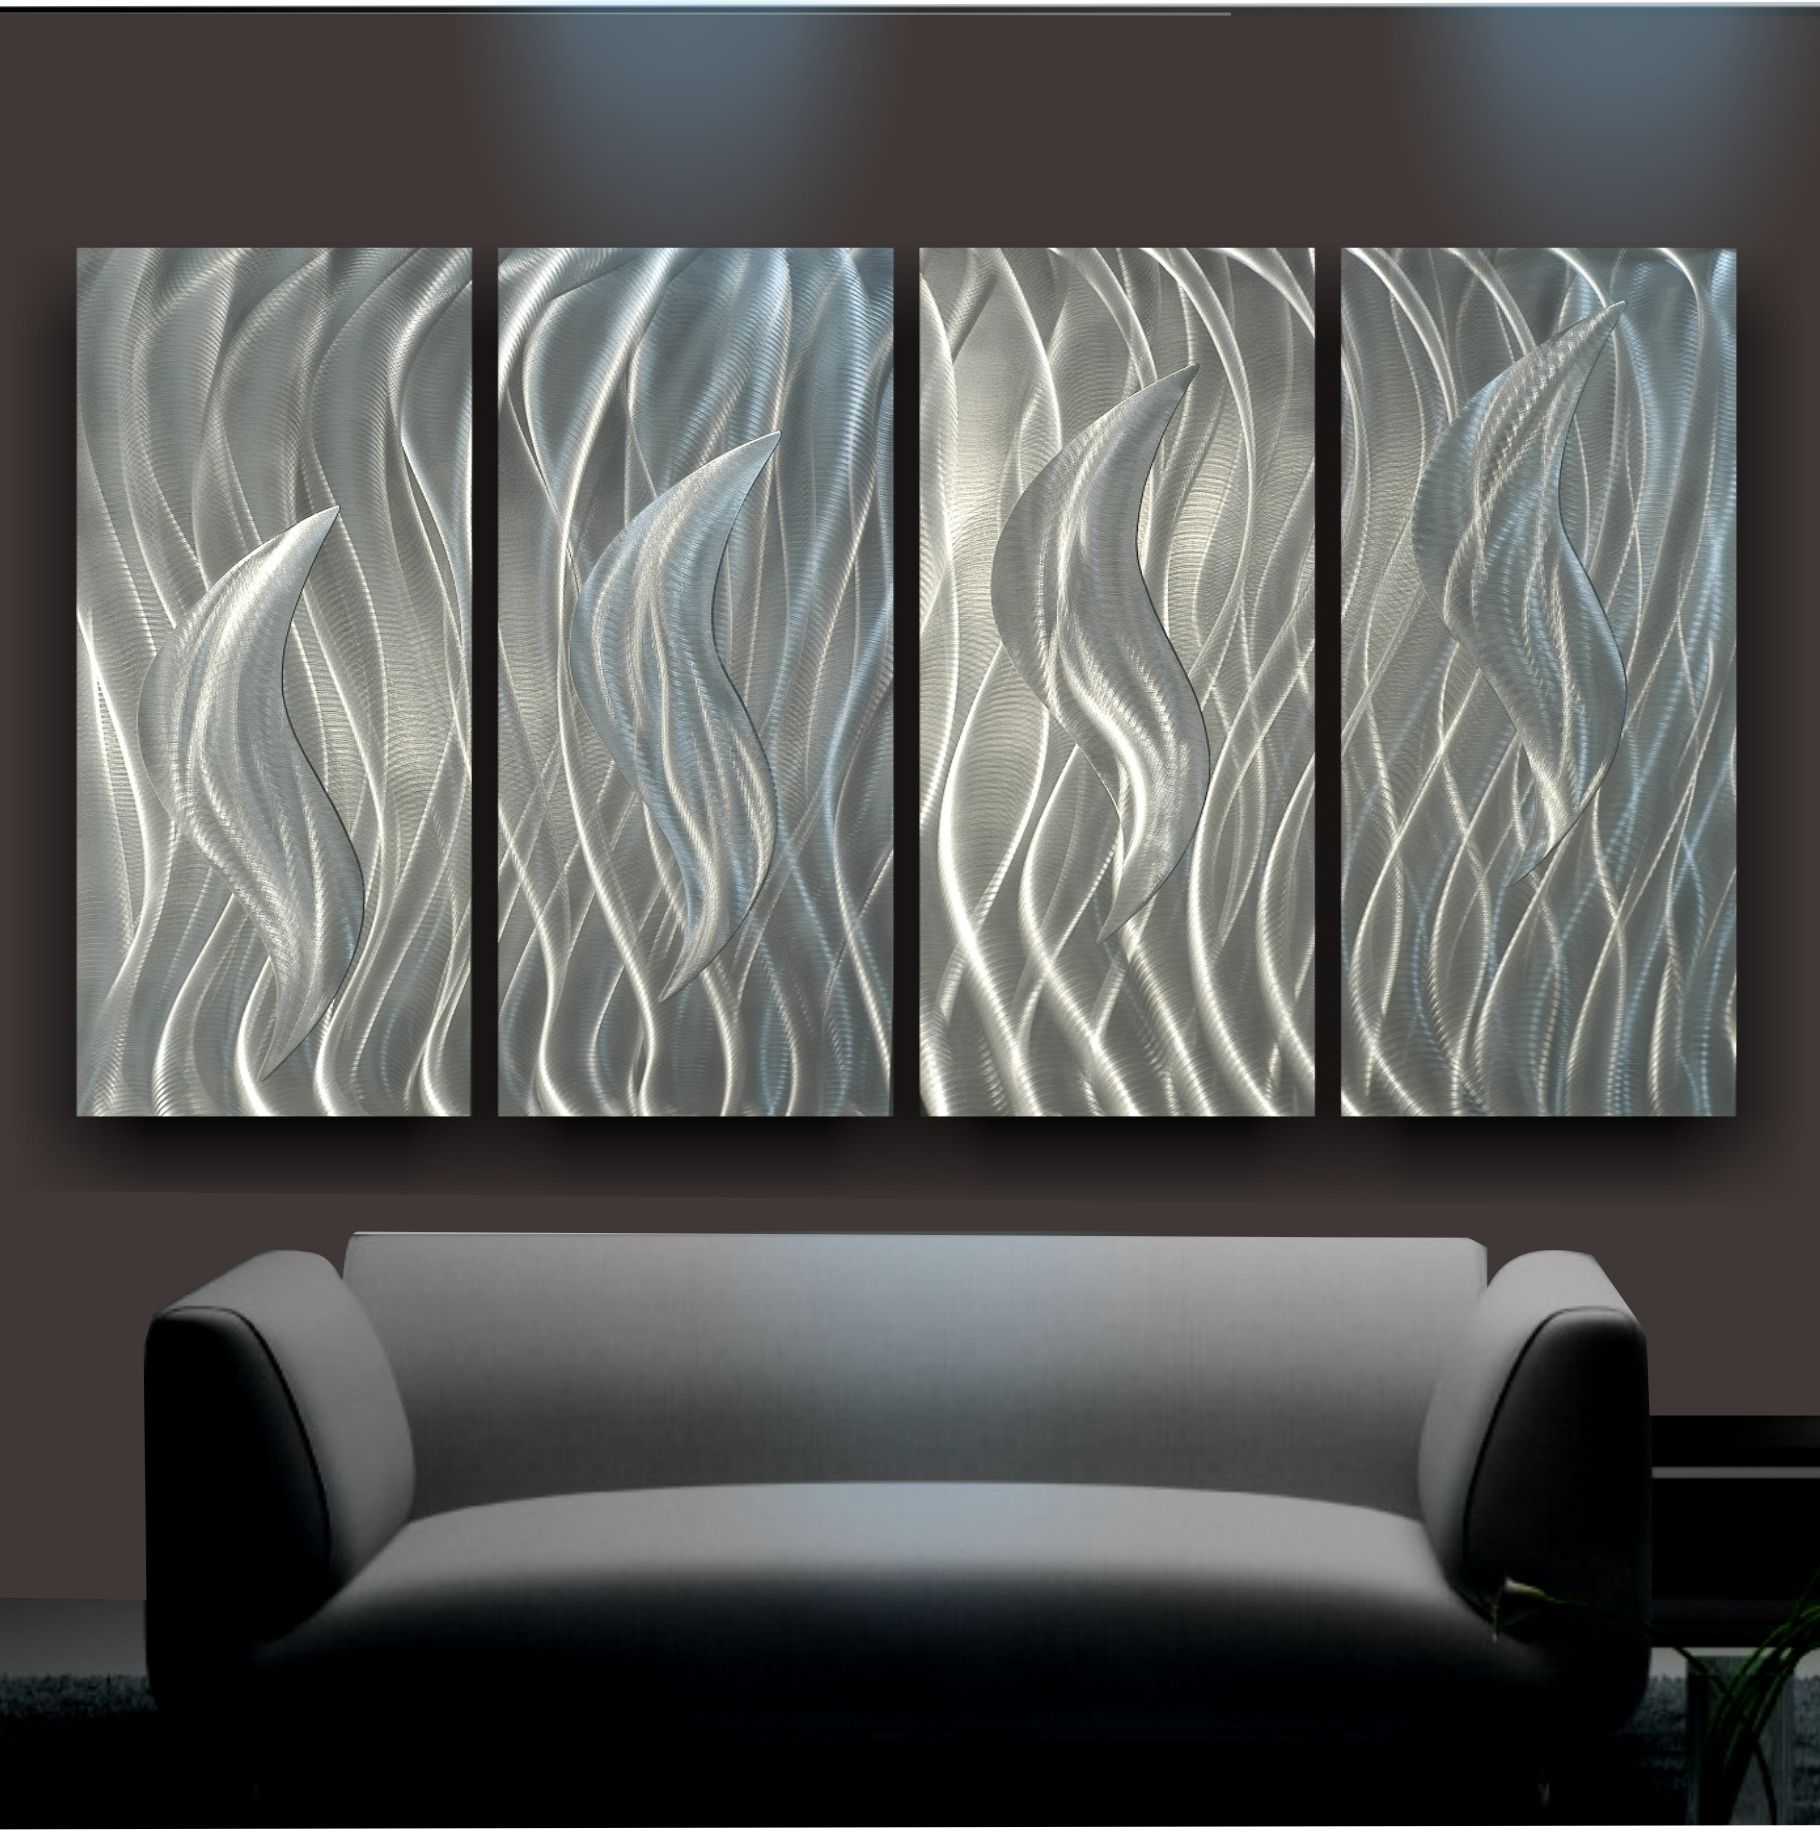 Ash Carl Metal Art With Most Up To Date Steel Wall Surface Fine Art Is A Contemporary Sort Of Art Work (View 1 of 15)